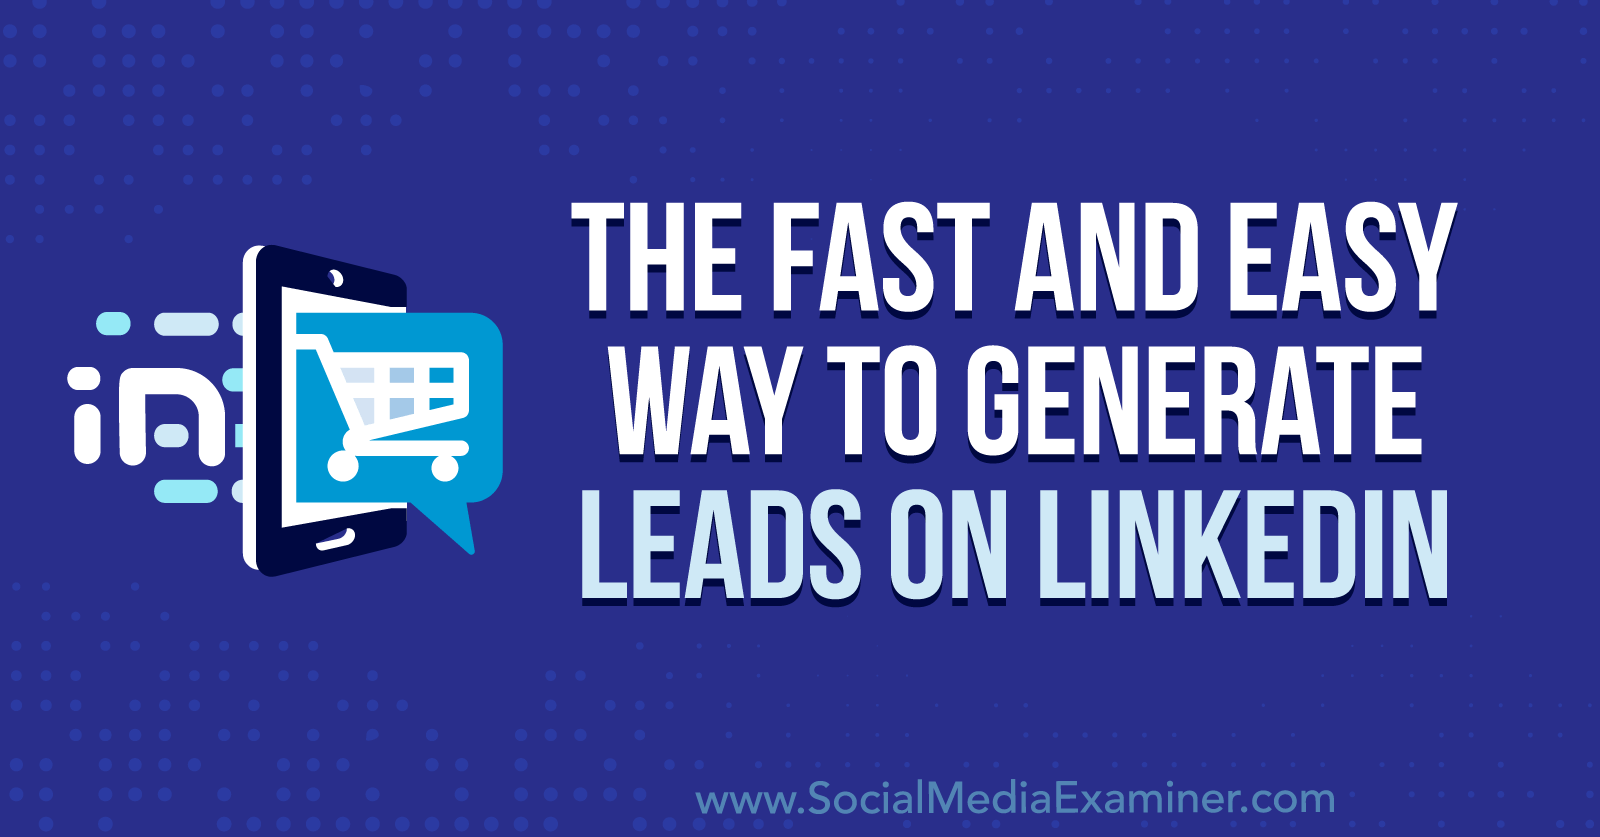 The Fast and Easy Way to Generate Leads on LinkedIn-Social Media Examiner